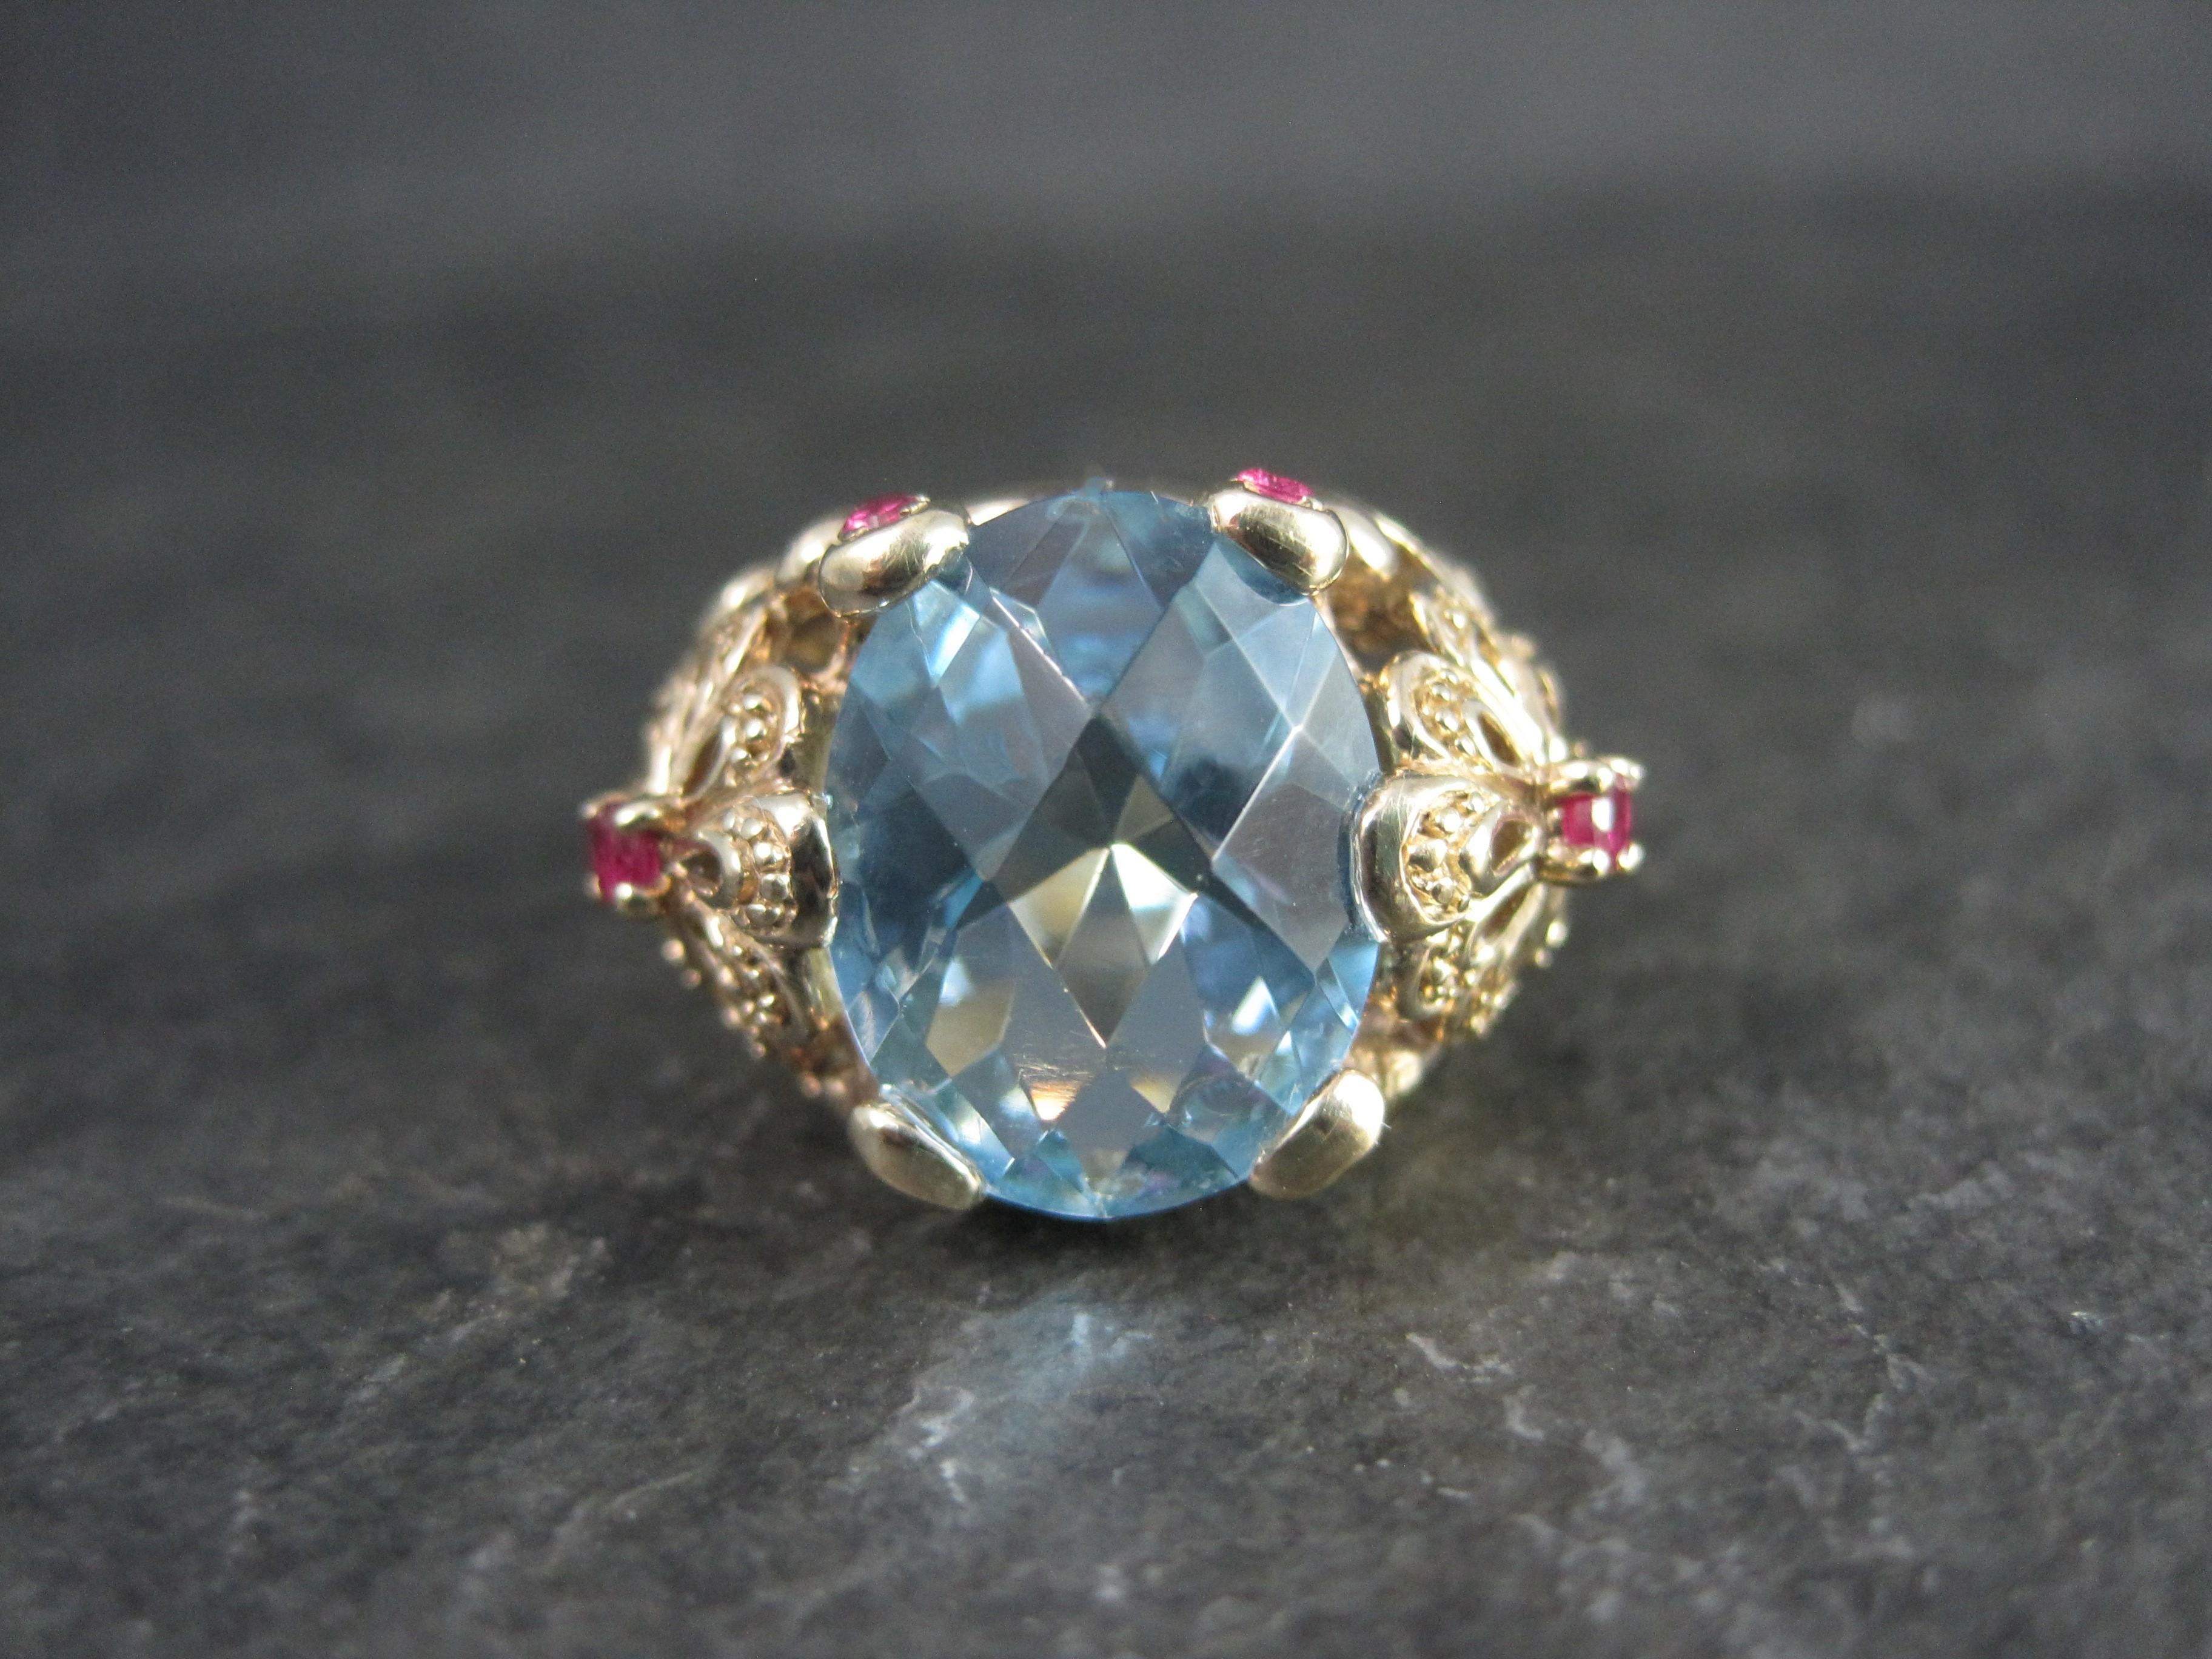 This stunning estate ring is gold vermeil over sterling silver.
It features an 11x14mm faceted blue topaz accented by 6 rubies.

The face of this ring measures 9/16 of an inch north to south with a rise of 9mm off the finger.
Size: 8

Marks: A,